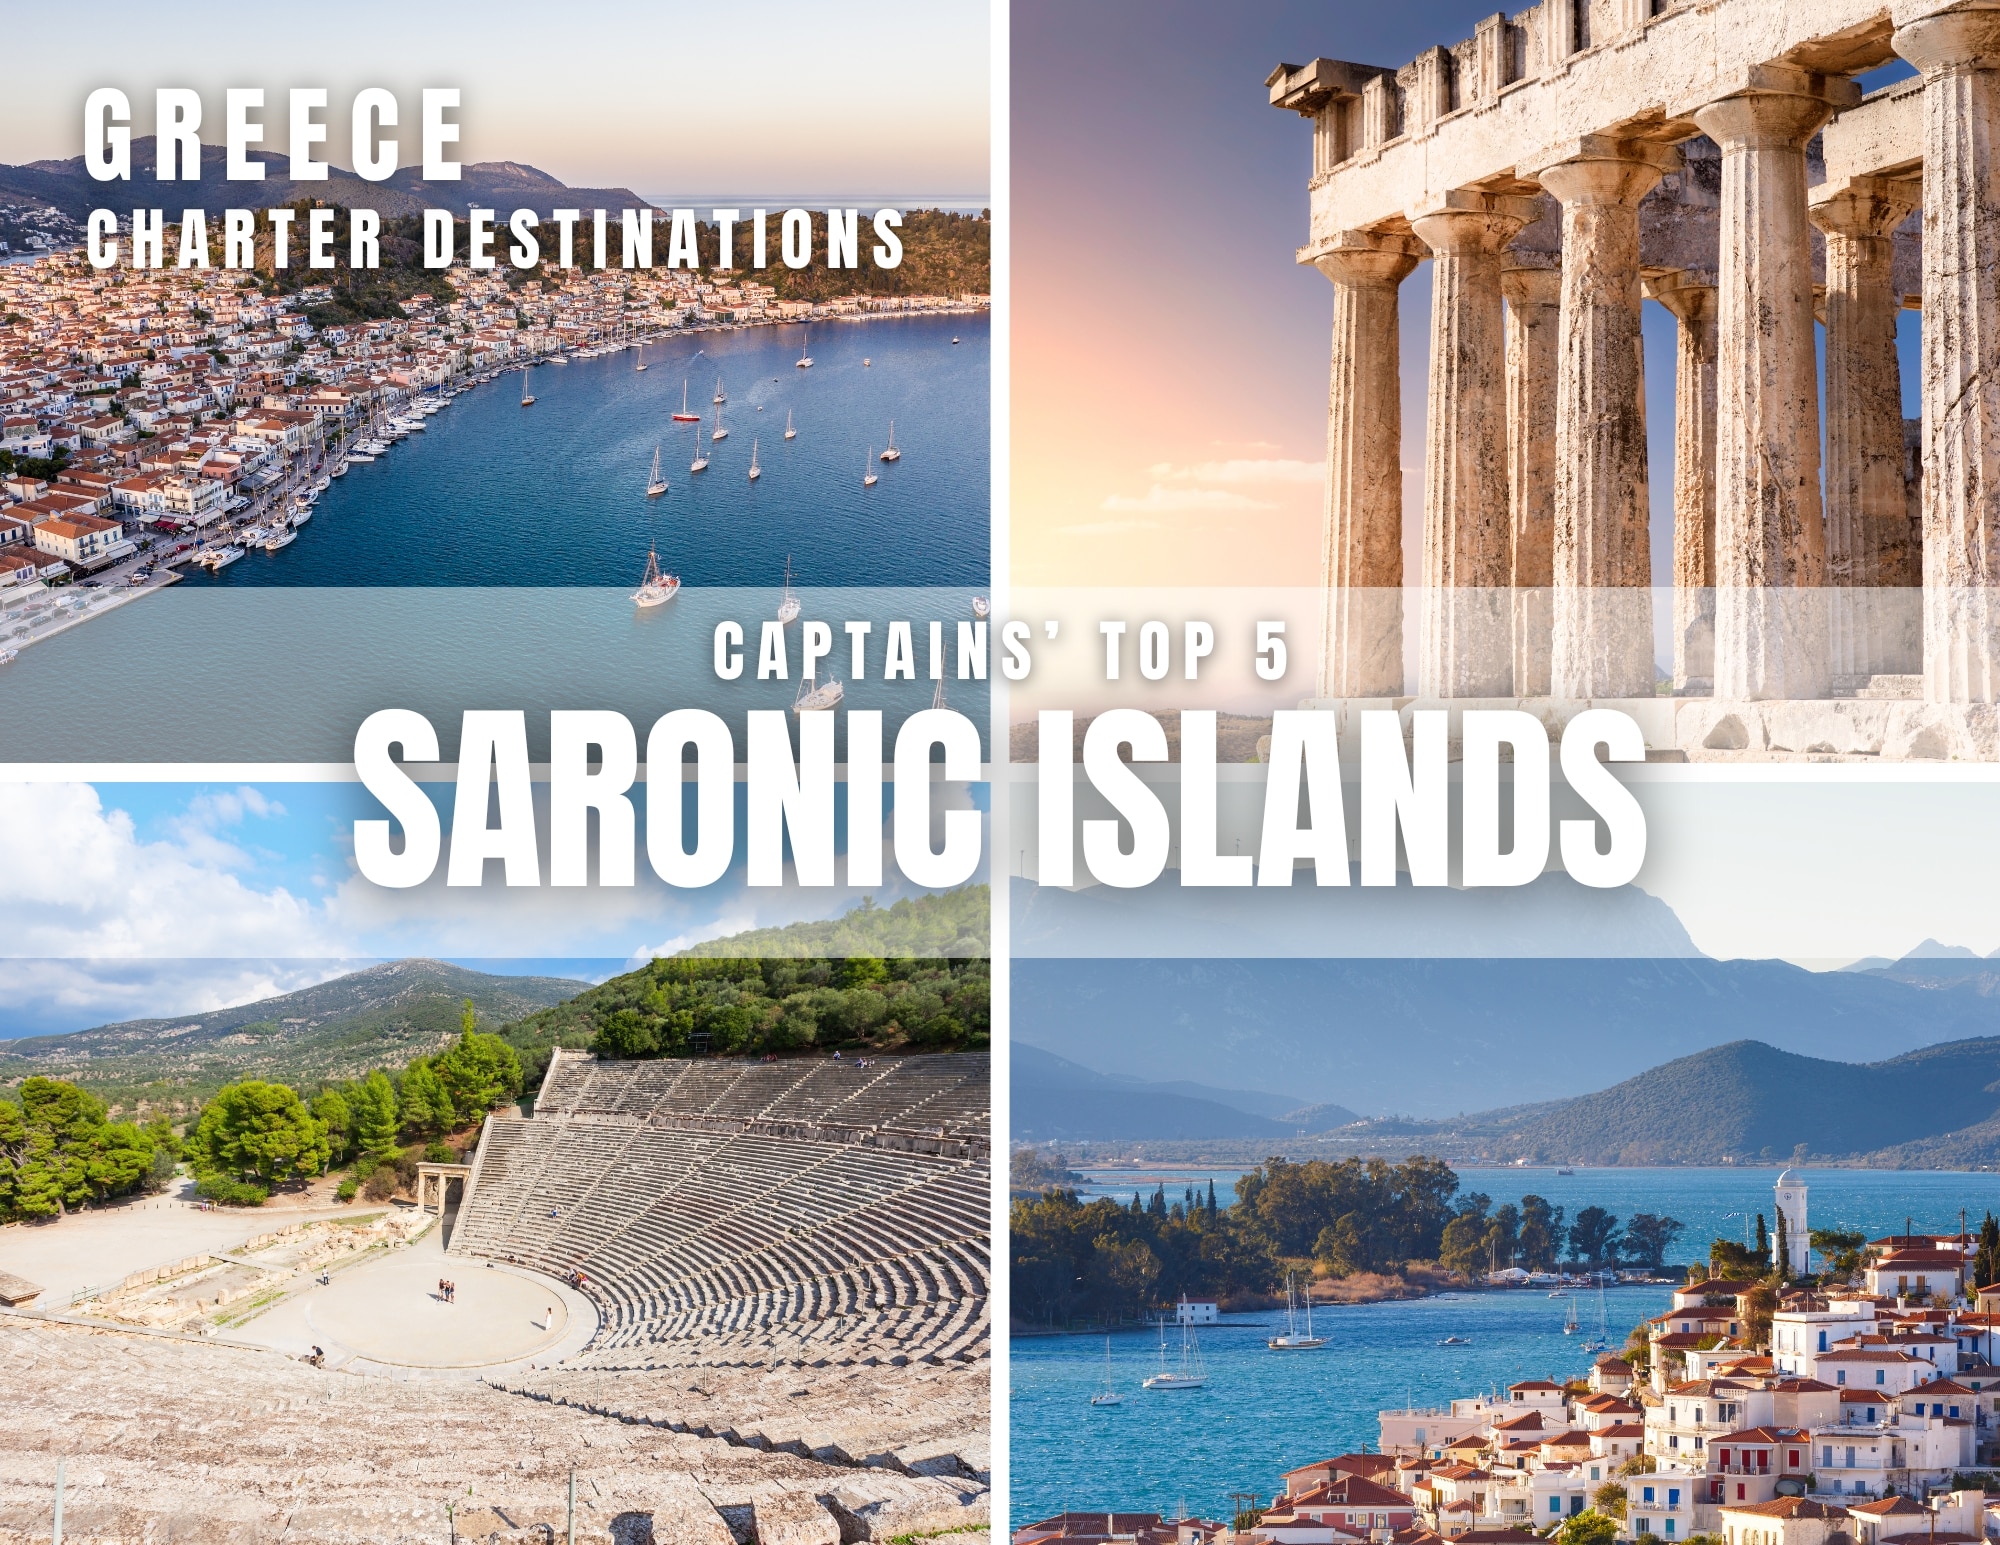 Collage of Greece's Saronic Islands featuring a top view of a bustling harbor with numerous sailboats, the iconic Parthenon at sunset, an ancient amphitheater, and a picturesque coastal town surrounded by mountains and clear waters. Text overlay reads 'Greece Charter Destinations - Captain's Top 5 Saronic Islands'